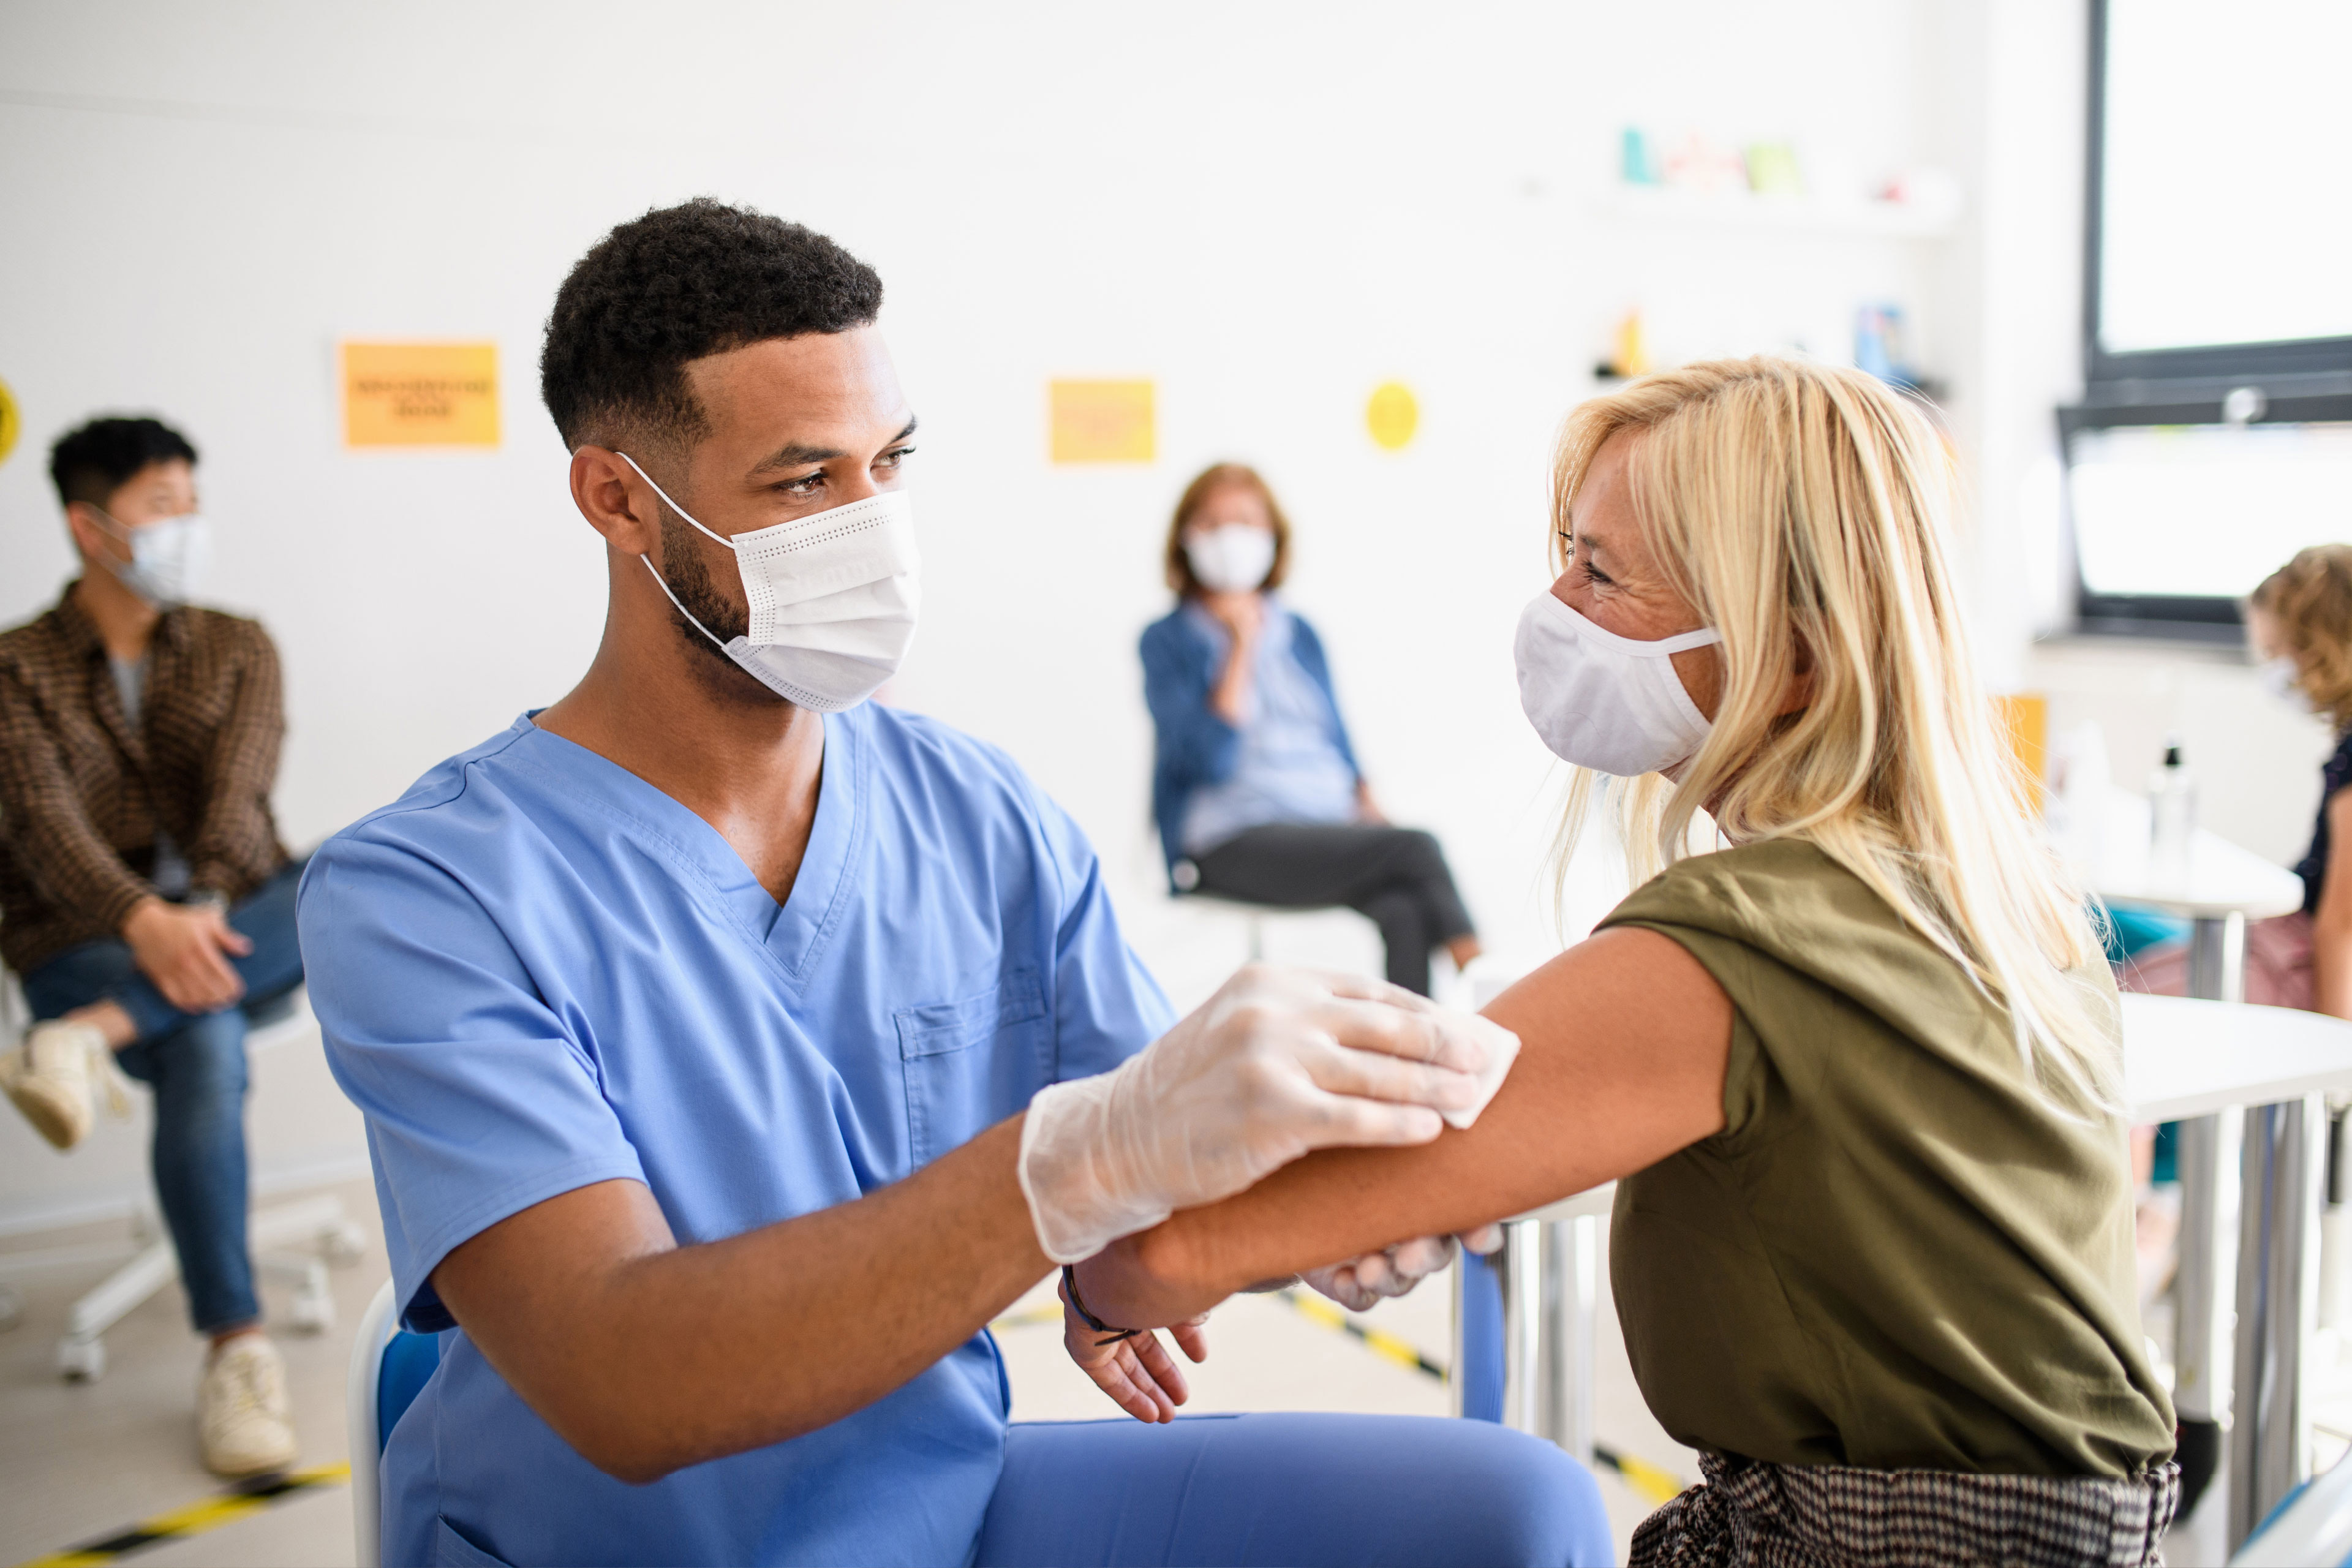 IS COVID 19 VACCINATIONS IN THE WORKPLACE MANDATORY?